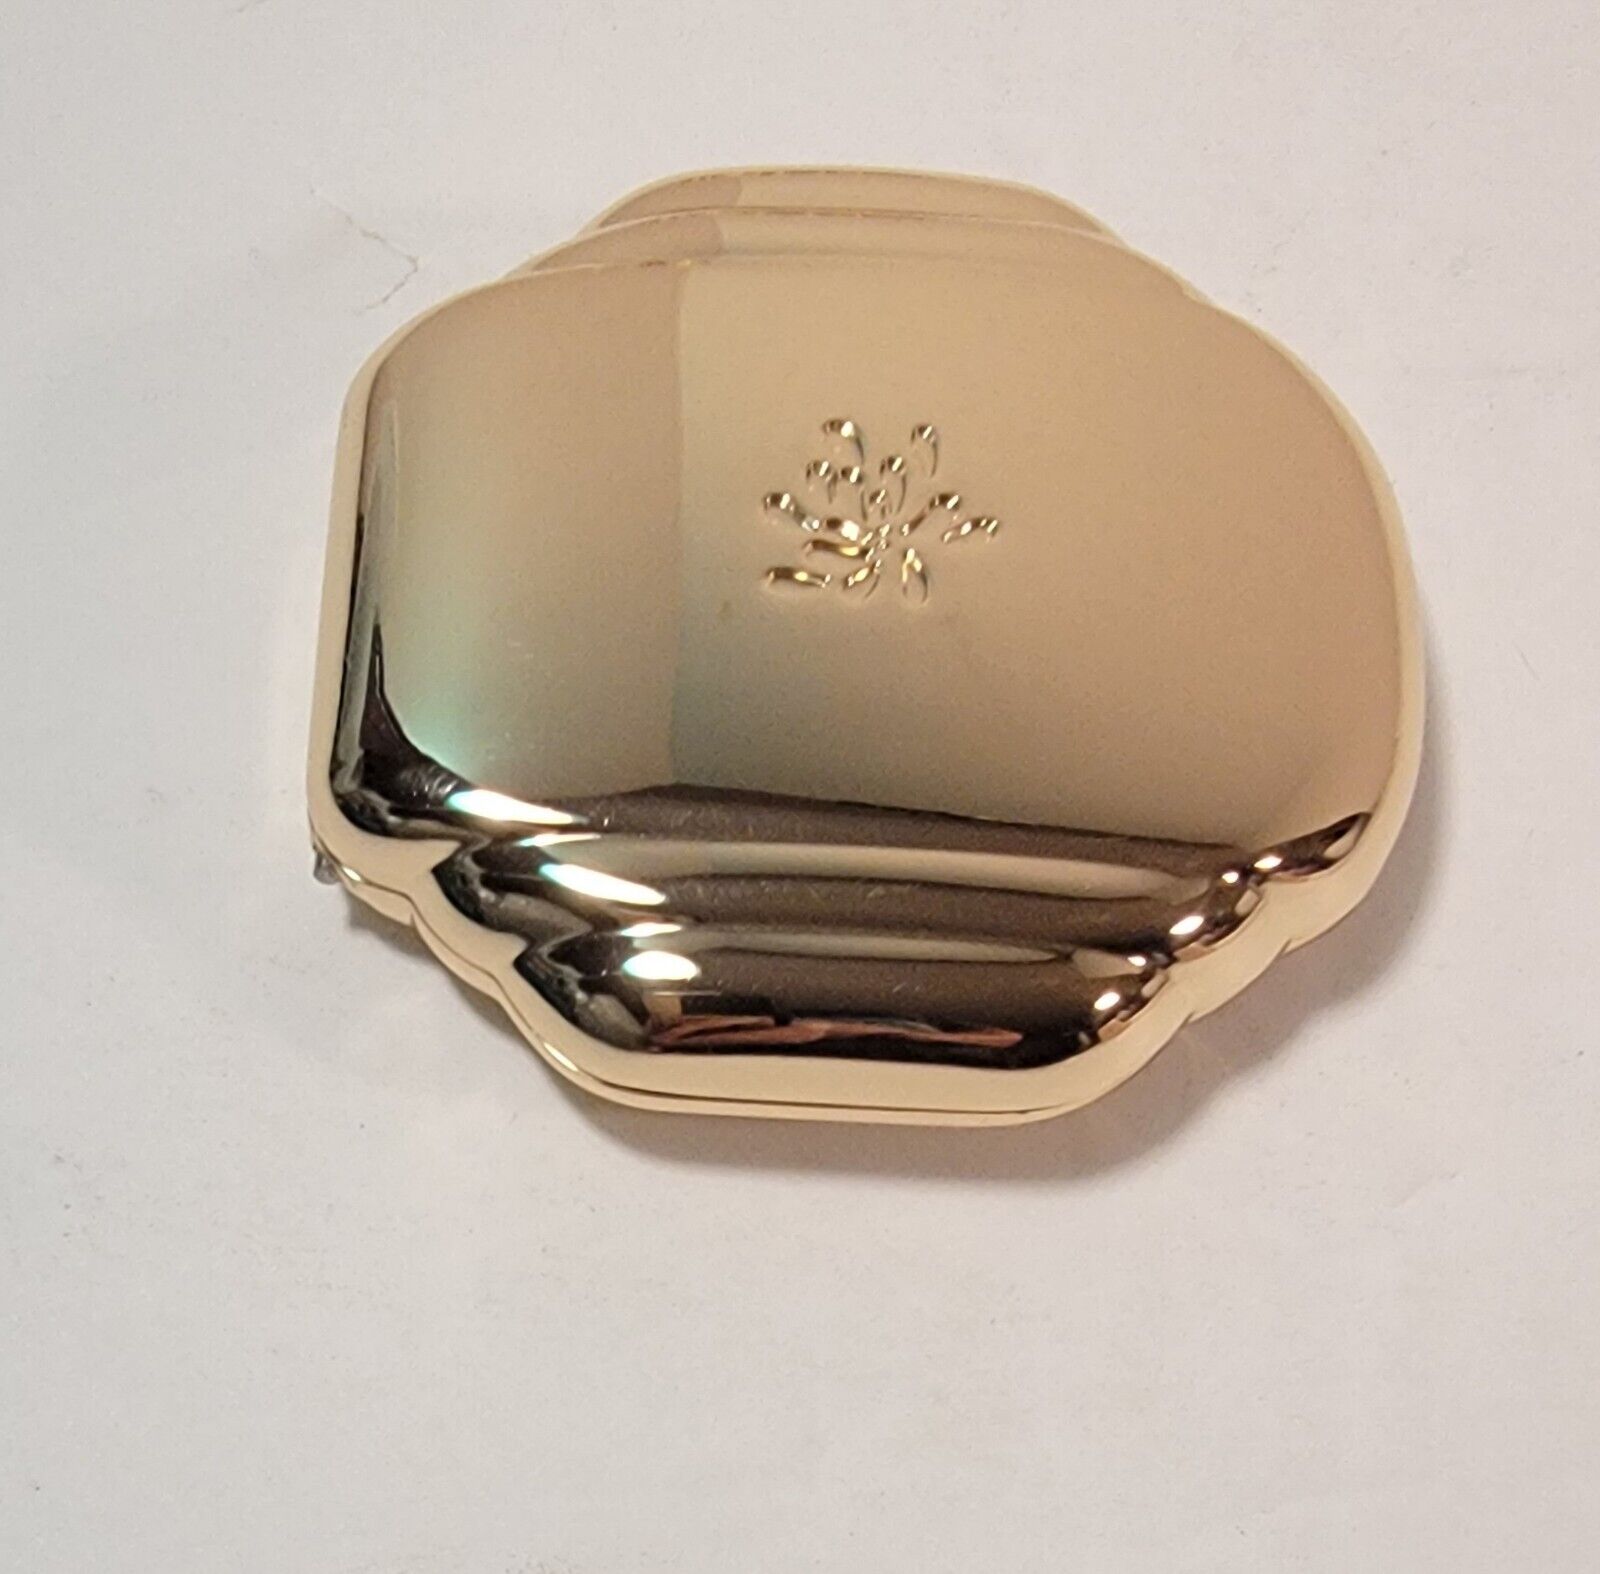 Besame Cosmetics Powder Compact Refillable 